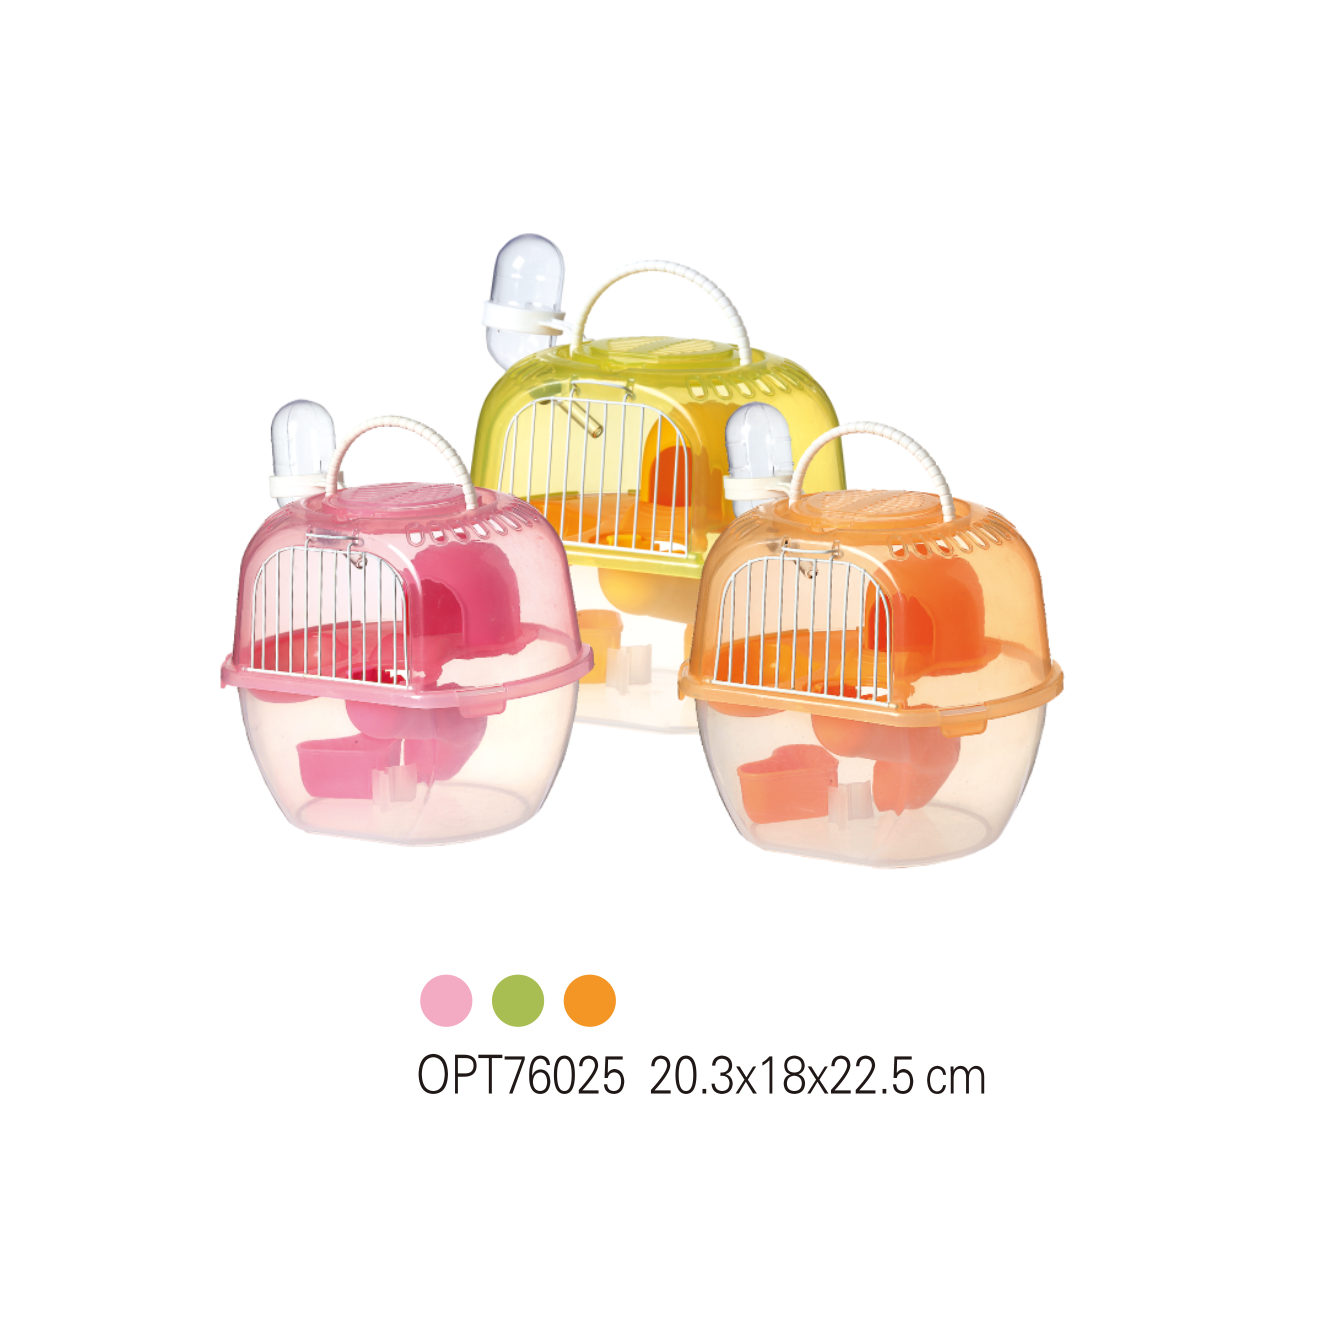 Hamster cages OPT76025